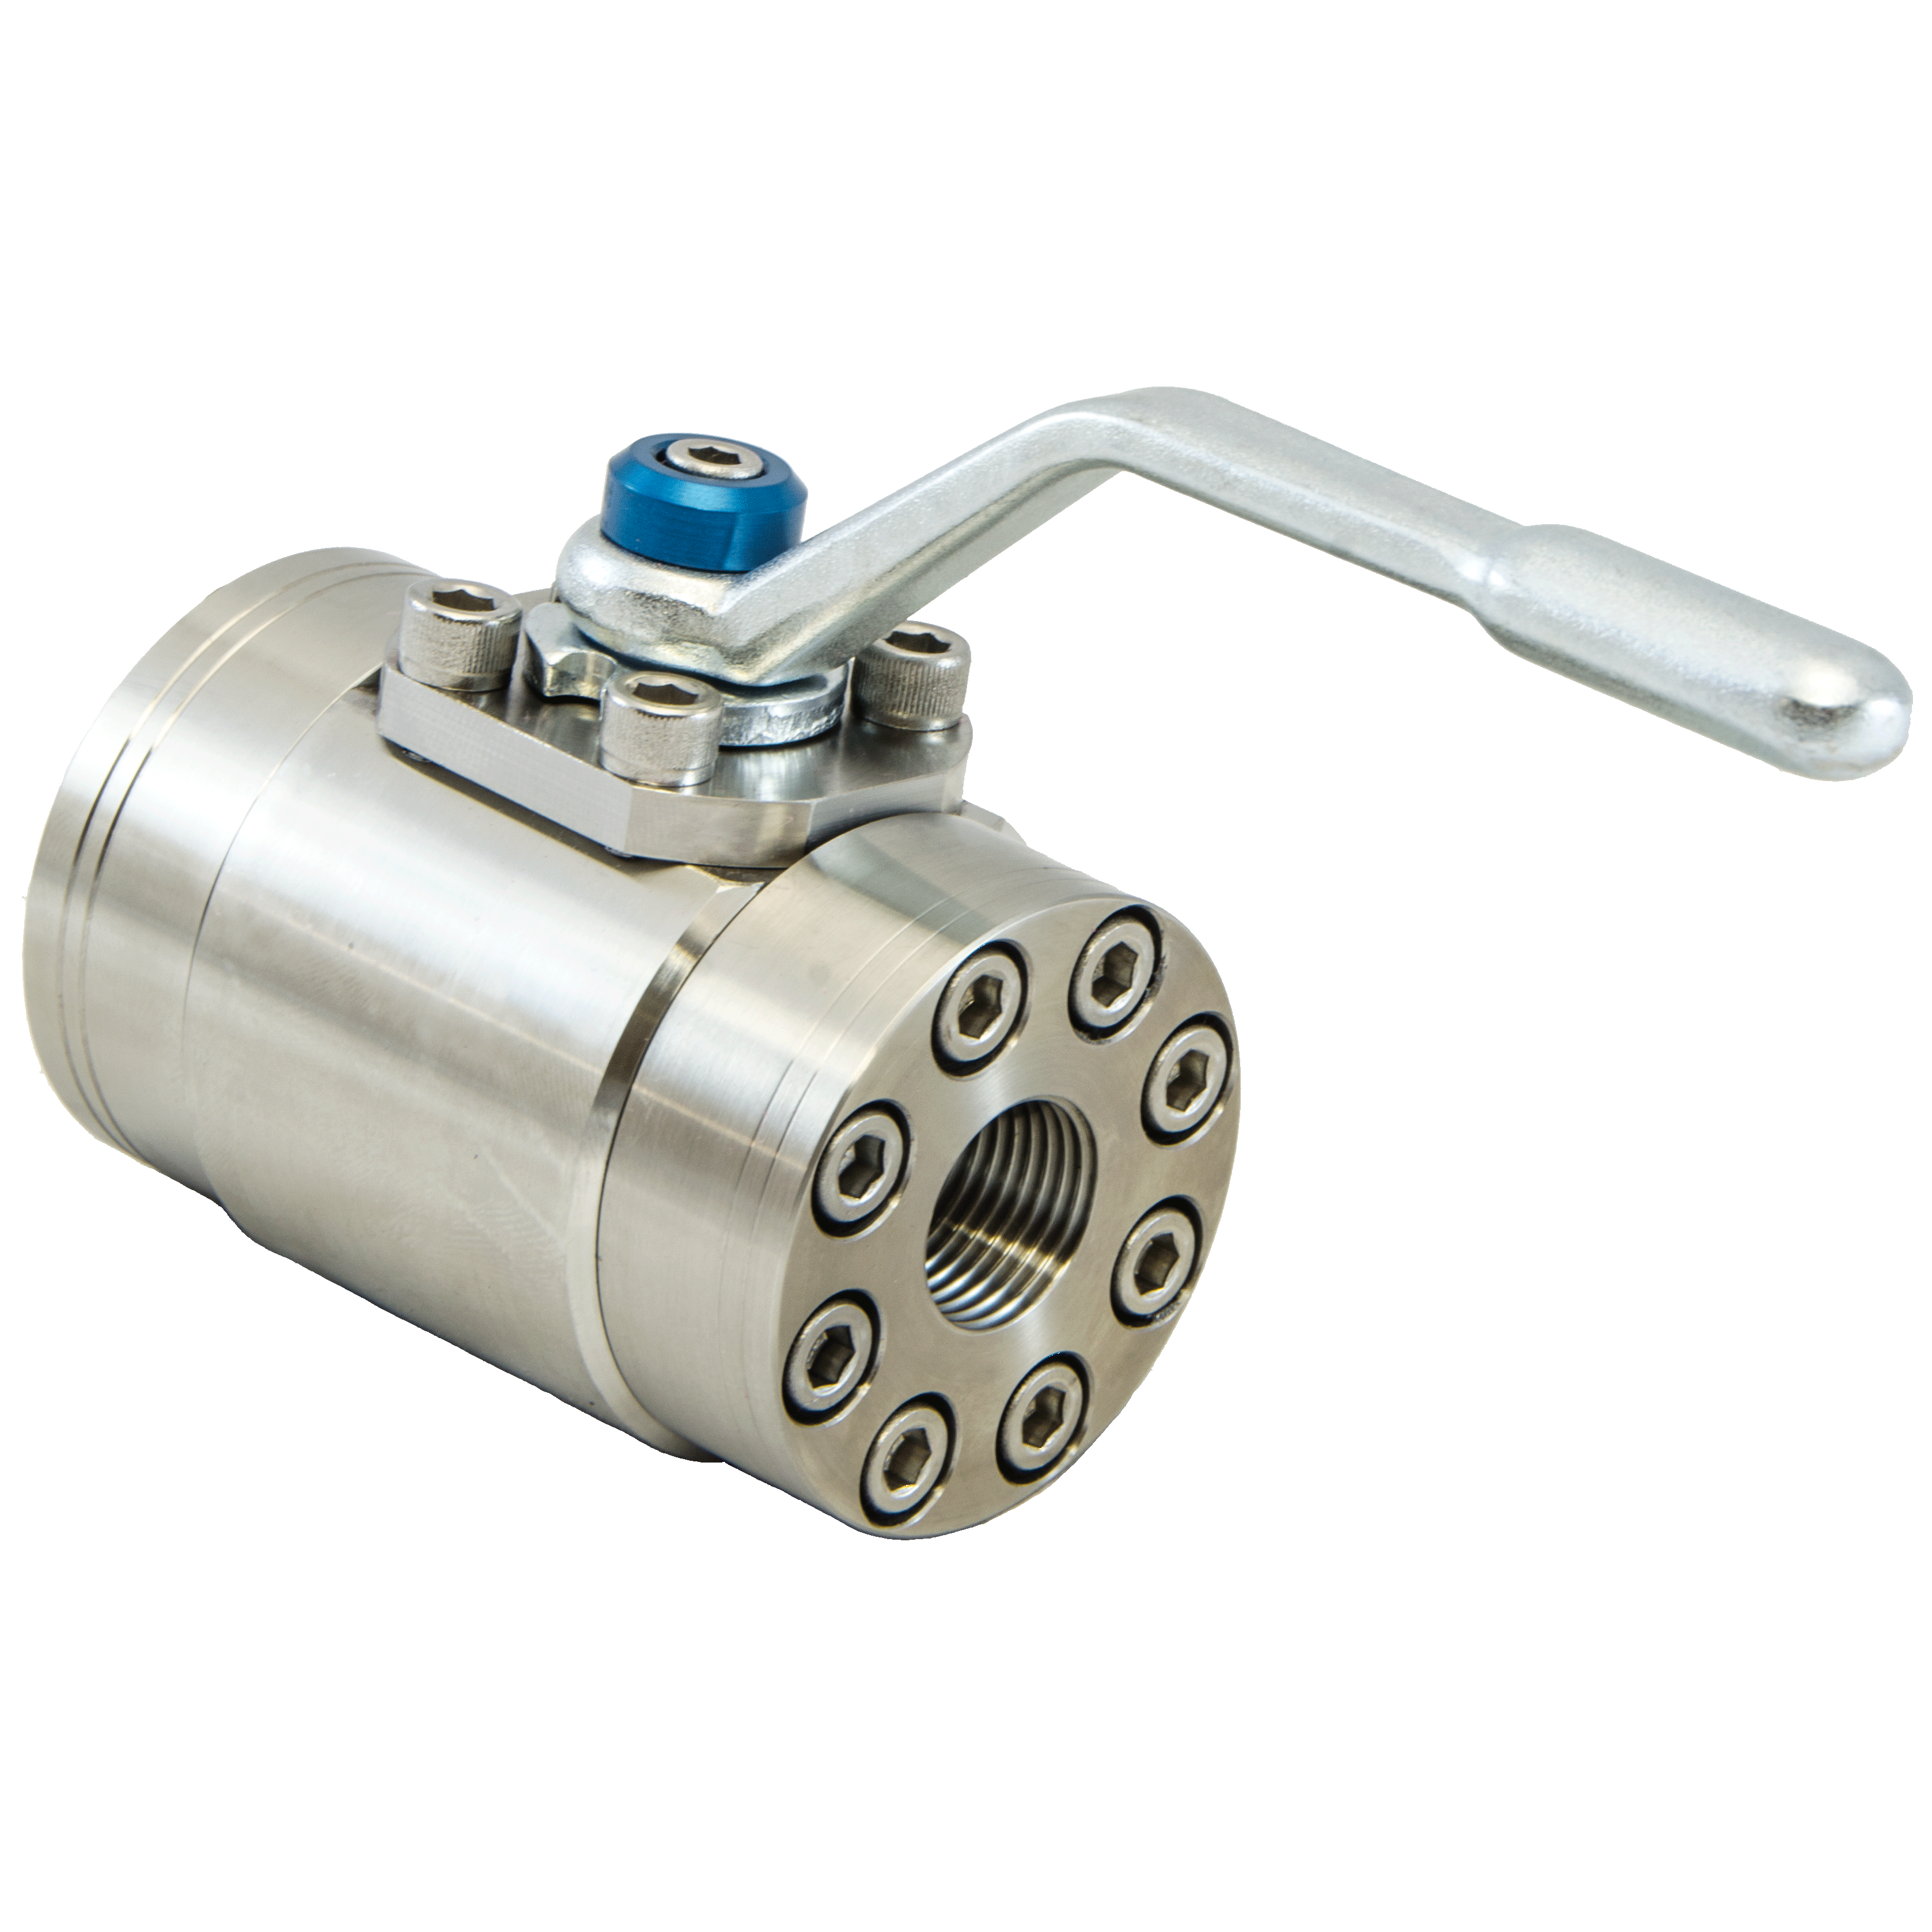 BVQG-0500N-2211 : DMIC Stainless Gas Ball Valve, 1/2 NPT, 316 Stainless Steel, 6000psi, Two-Way